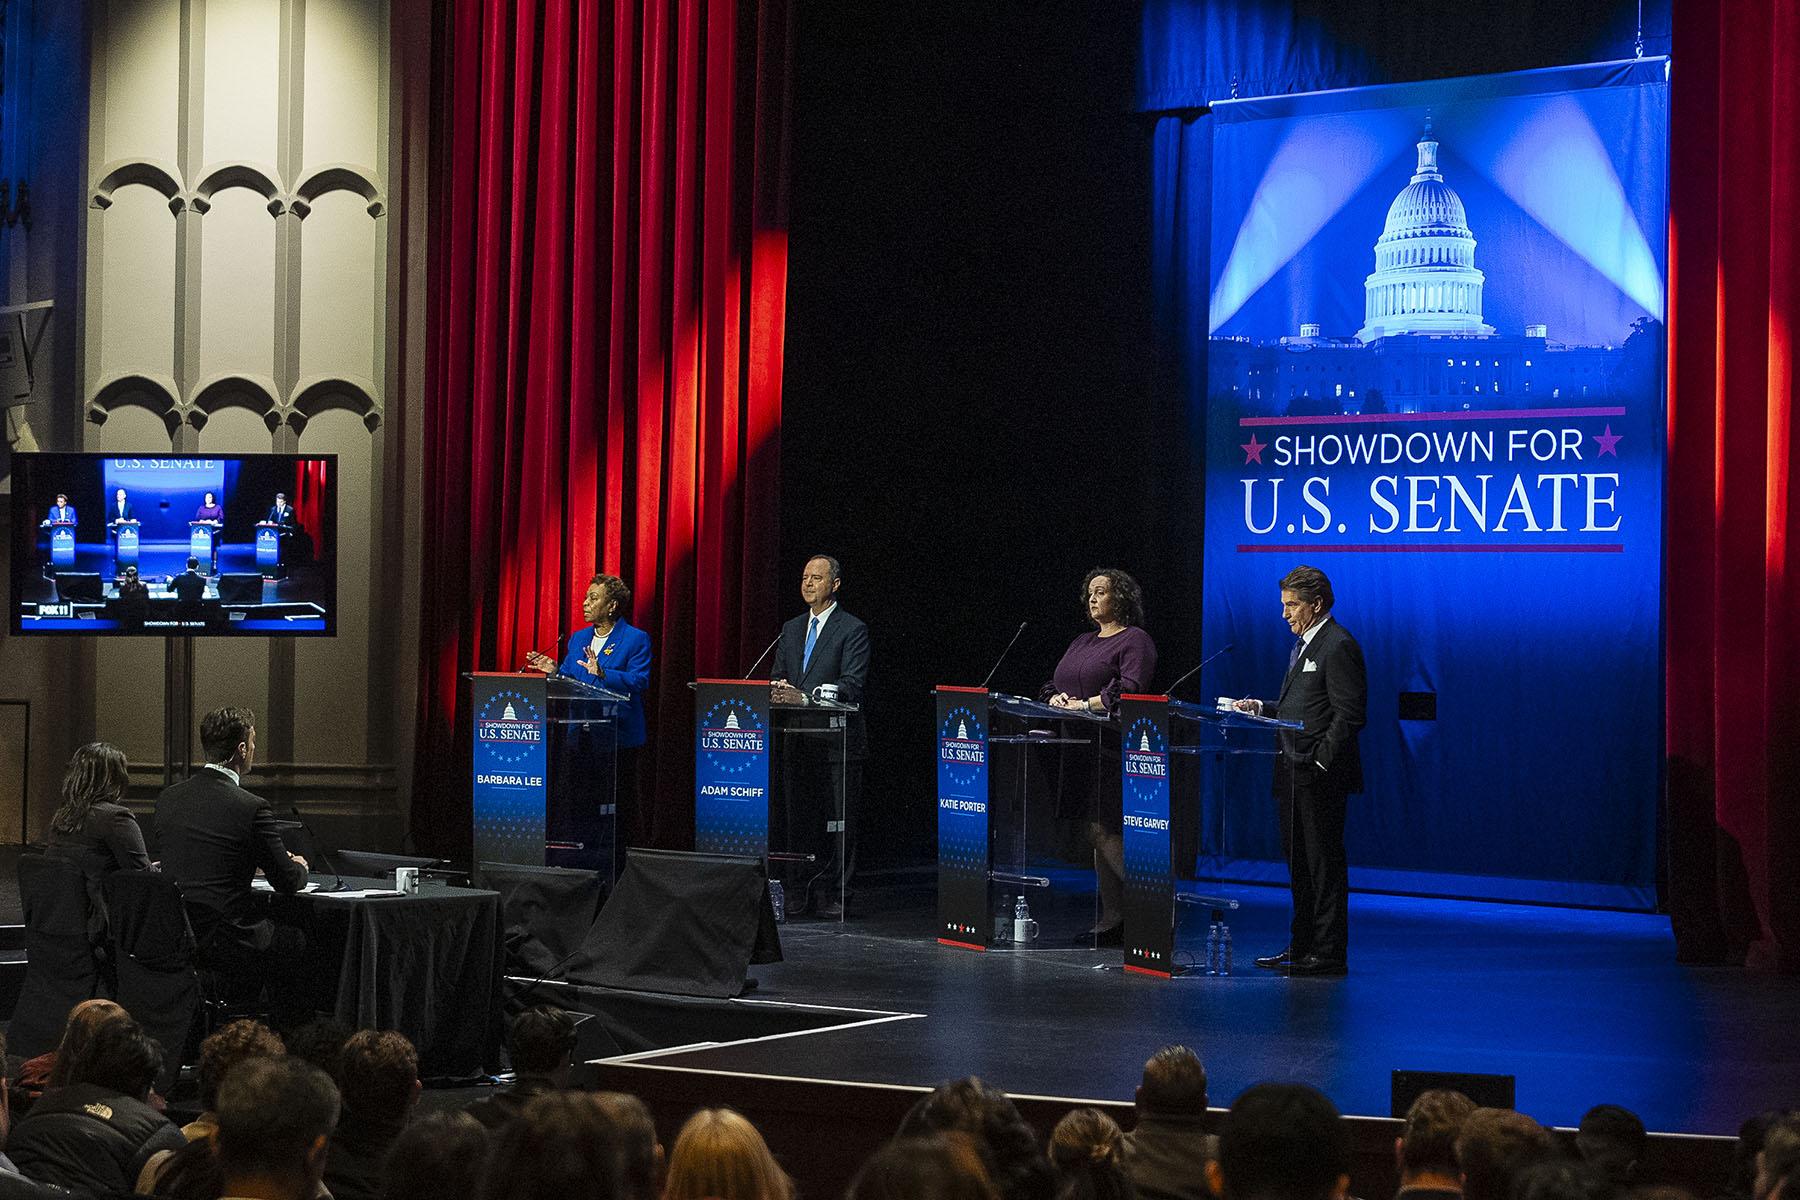 Senate Candidates for California stand on stage during a televised debate.